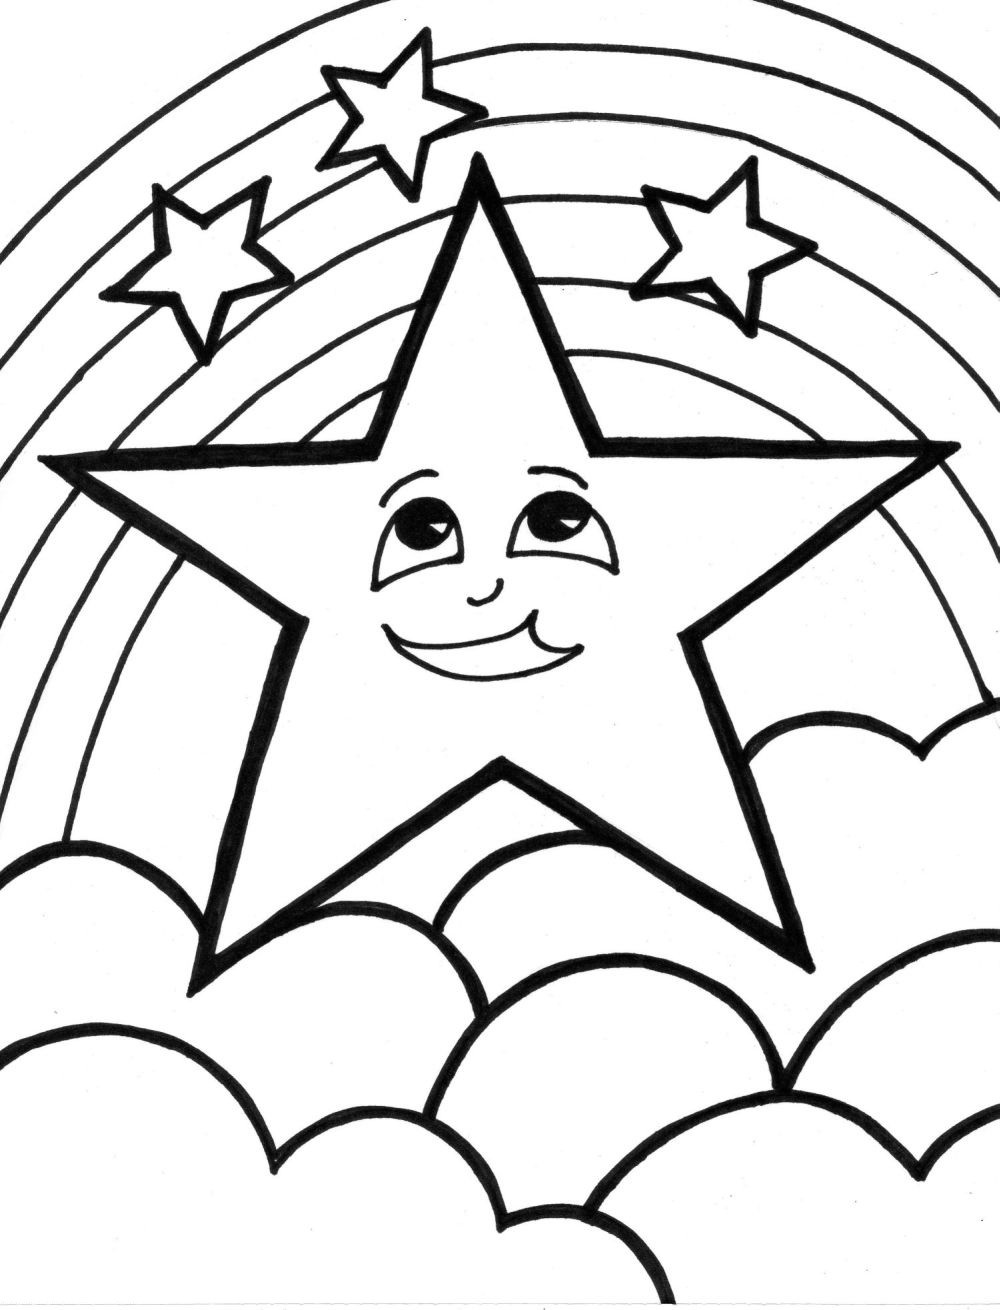 Free Printable Coloring Sheets For 10 Year Olds
 Free Printable Coloring Pages For 7 Year Olds The Color